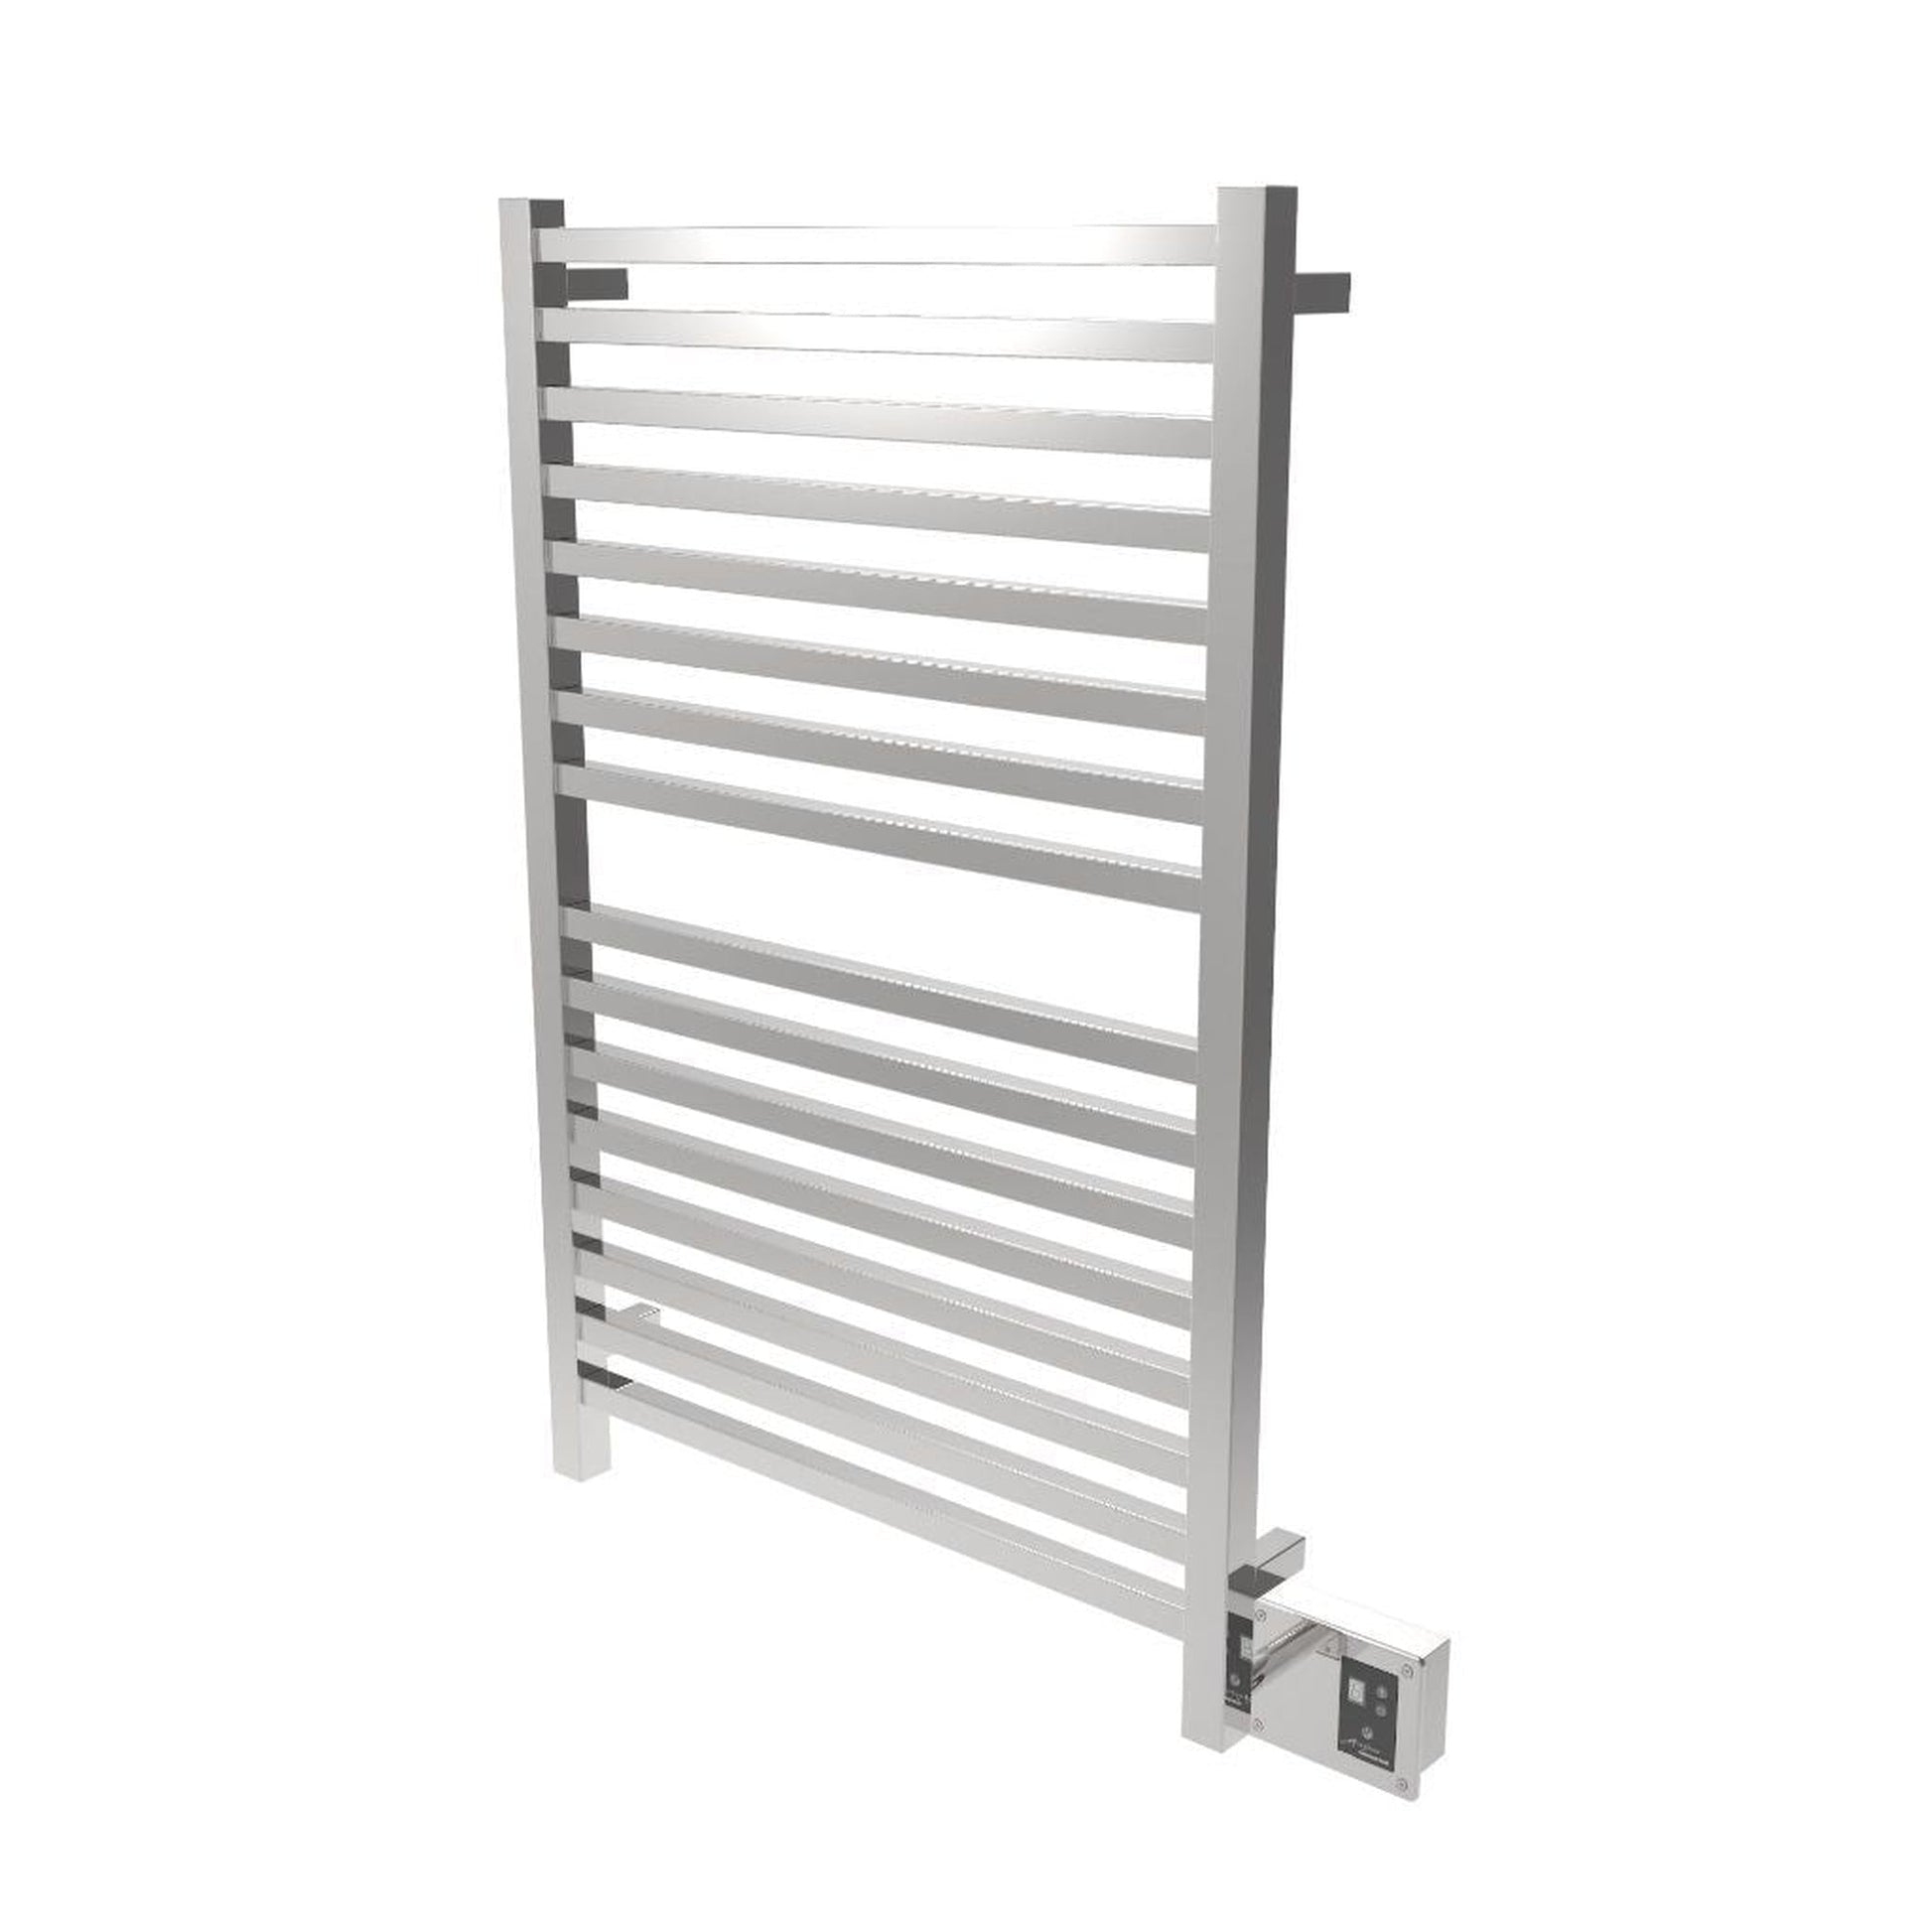 Amba Quadro 28" x 42" 16-Bar Polished Stainless Steel Hardwired Towel Warmer With Digital Heat Controller